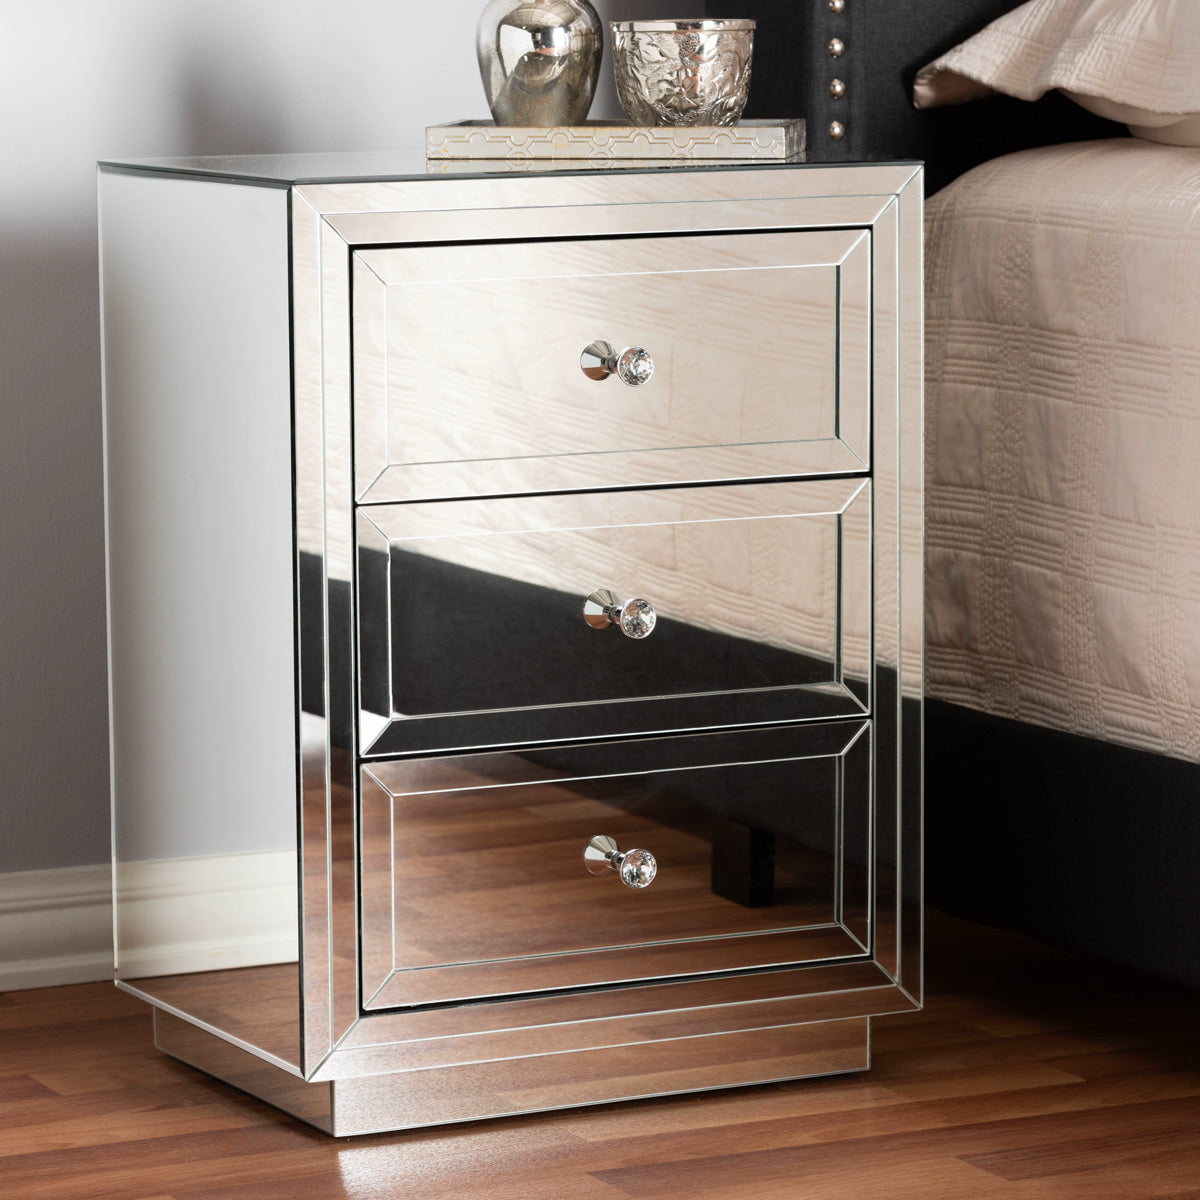 Baxton Studio Lina Modern and Contemporary Hollywood Regency Glamour Style Mirrored Three Drawer Nightstand Bedside Table Baxton Studio-nightstands-Minimal And Modern - 5